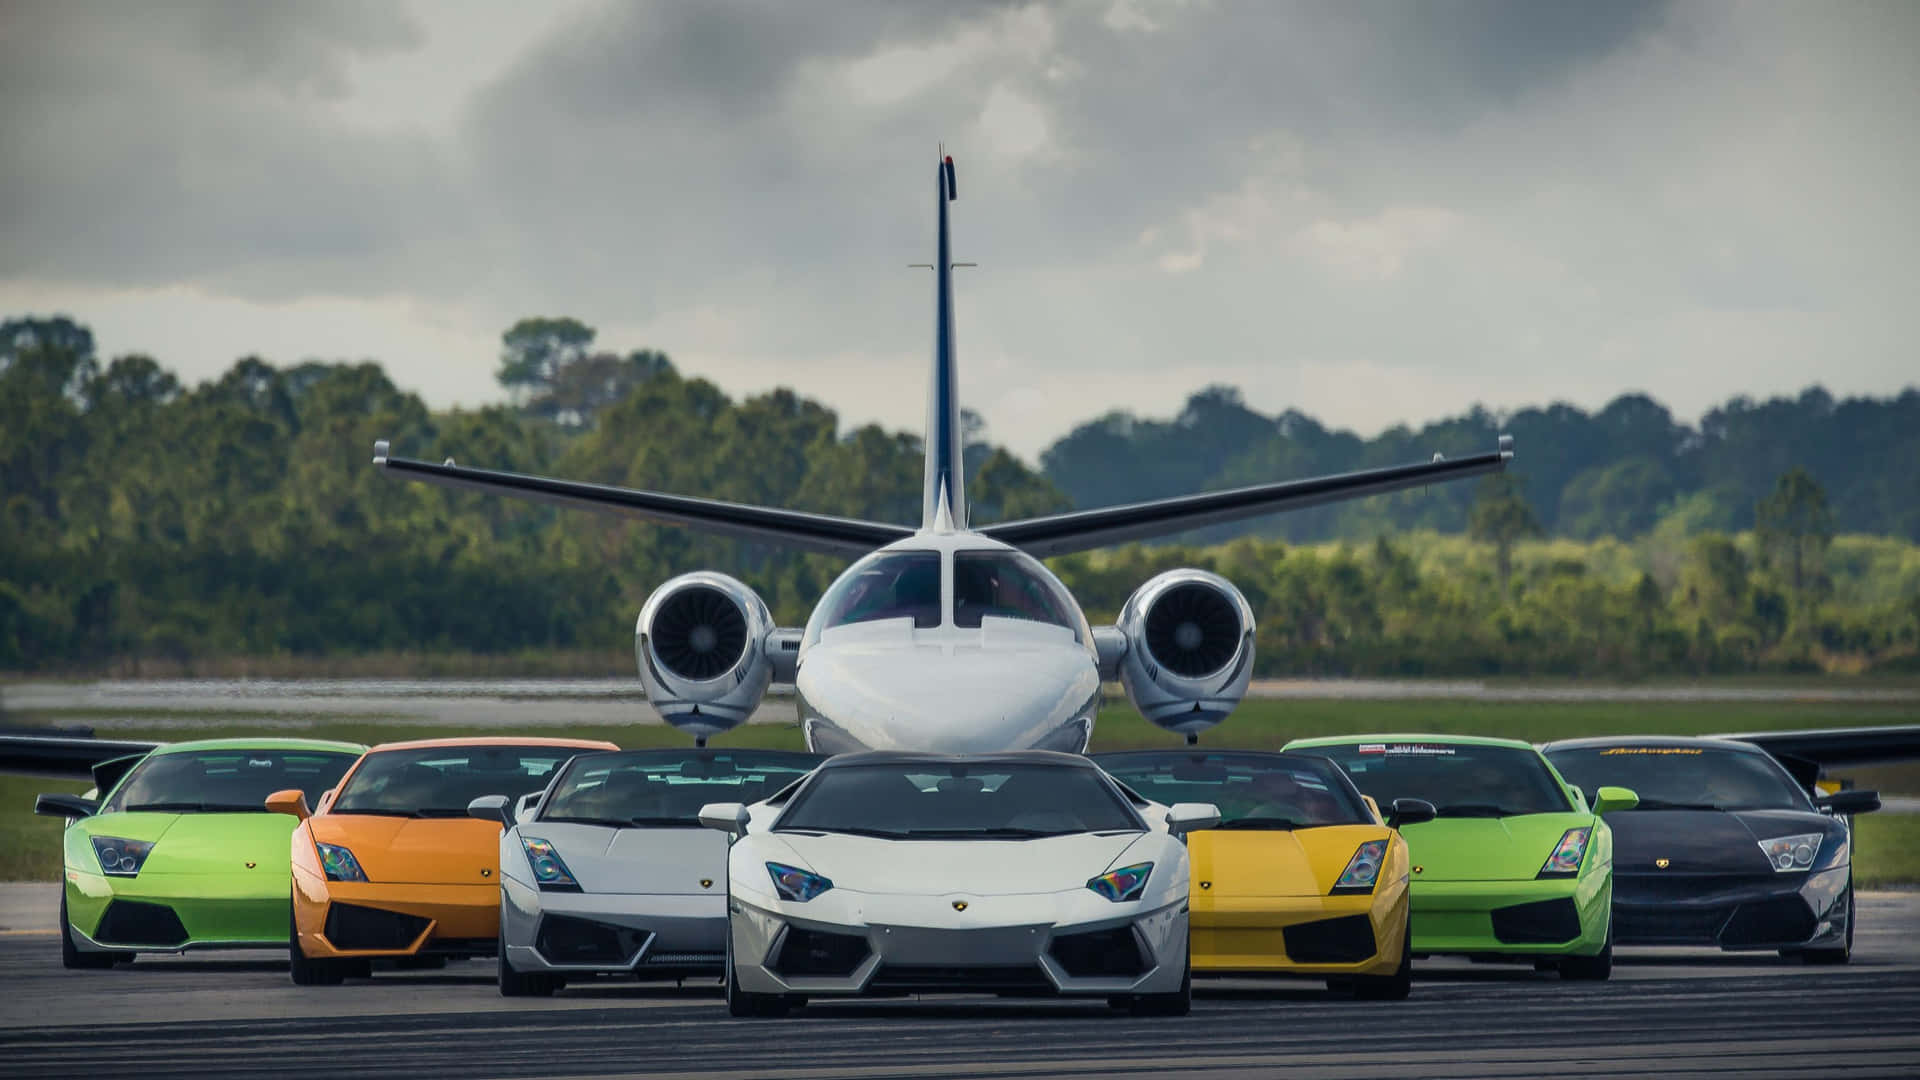 “Driving on a Private Jet and Experiencing Luxury” Wallpaper